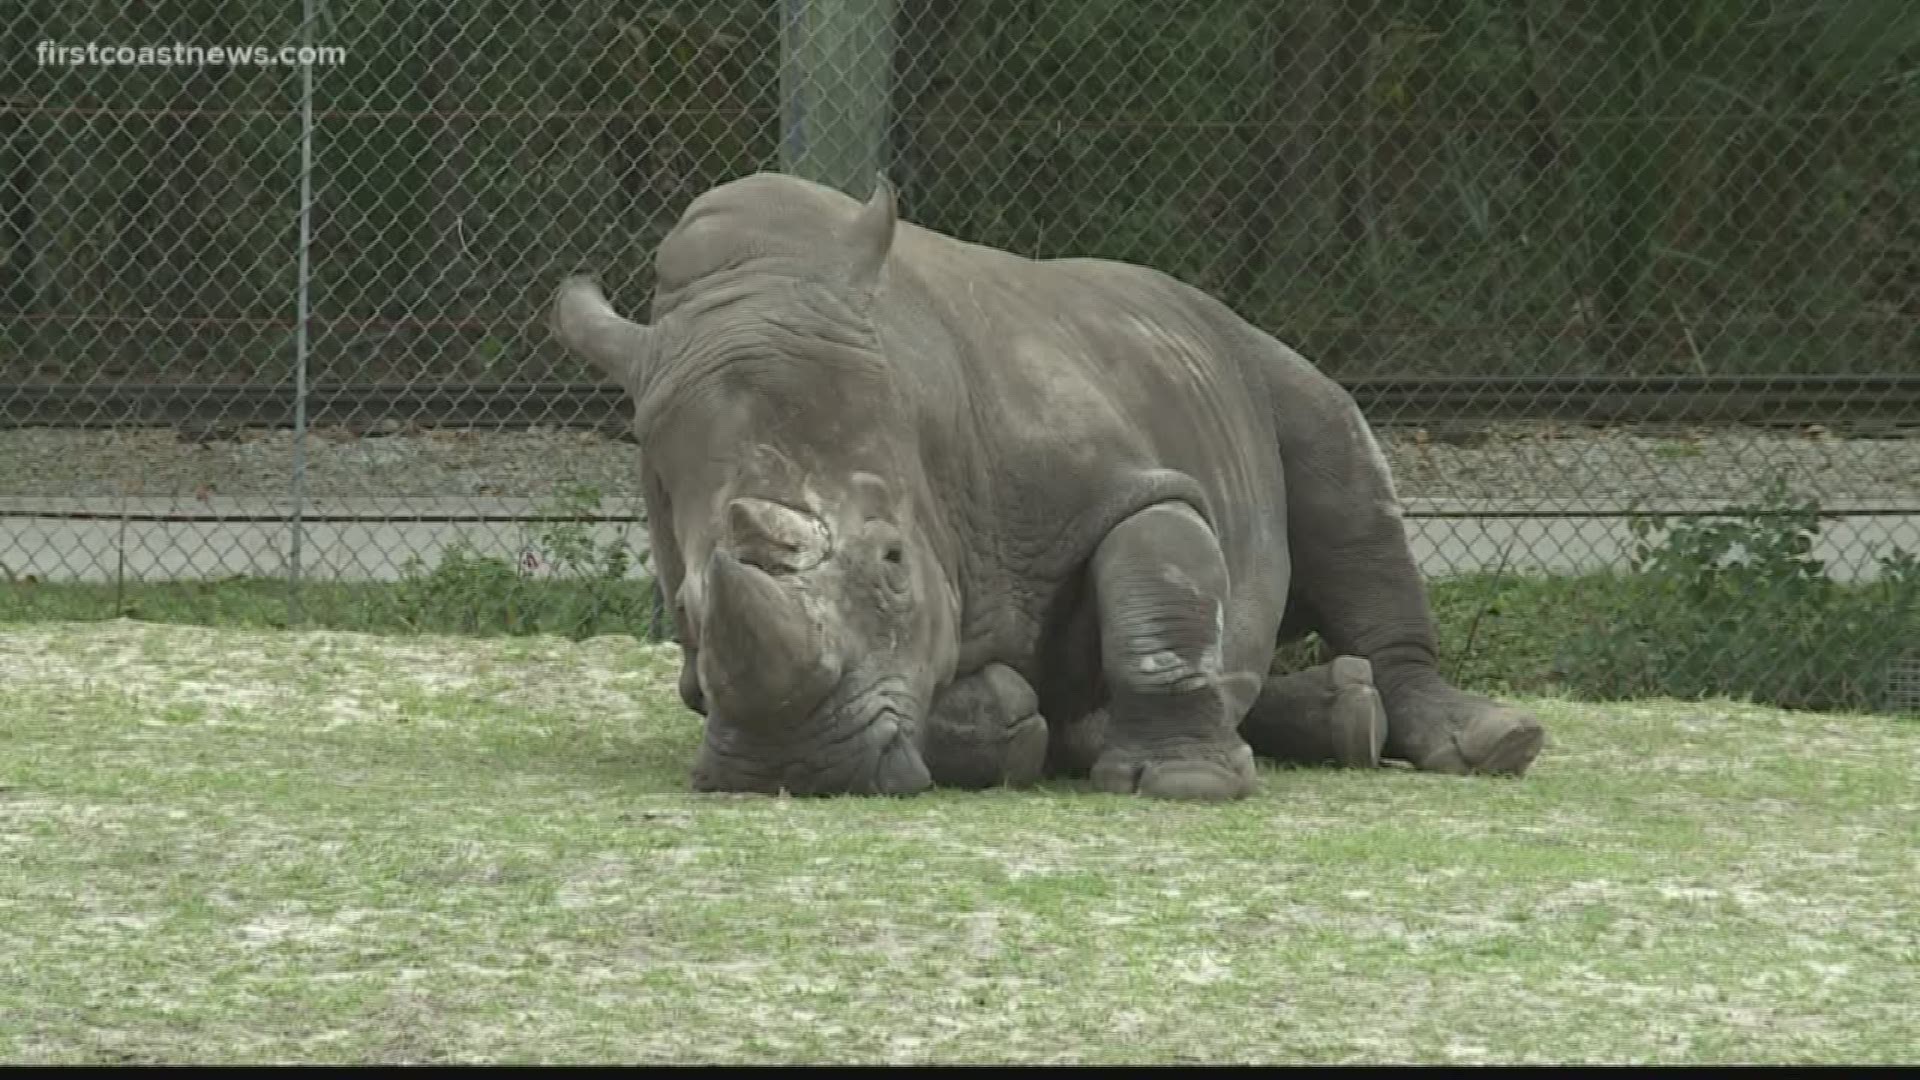 A zookeeper at the Jacksonville Zoo is expected to be OK after she was seriously injured by a rhino who struck her with his horn.